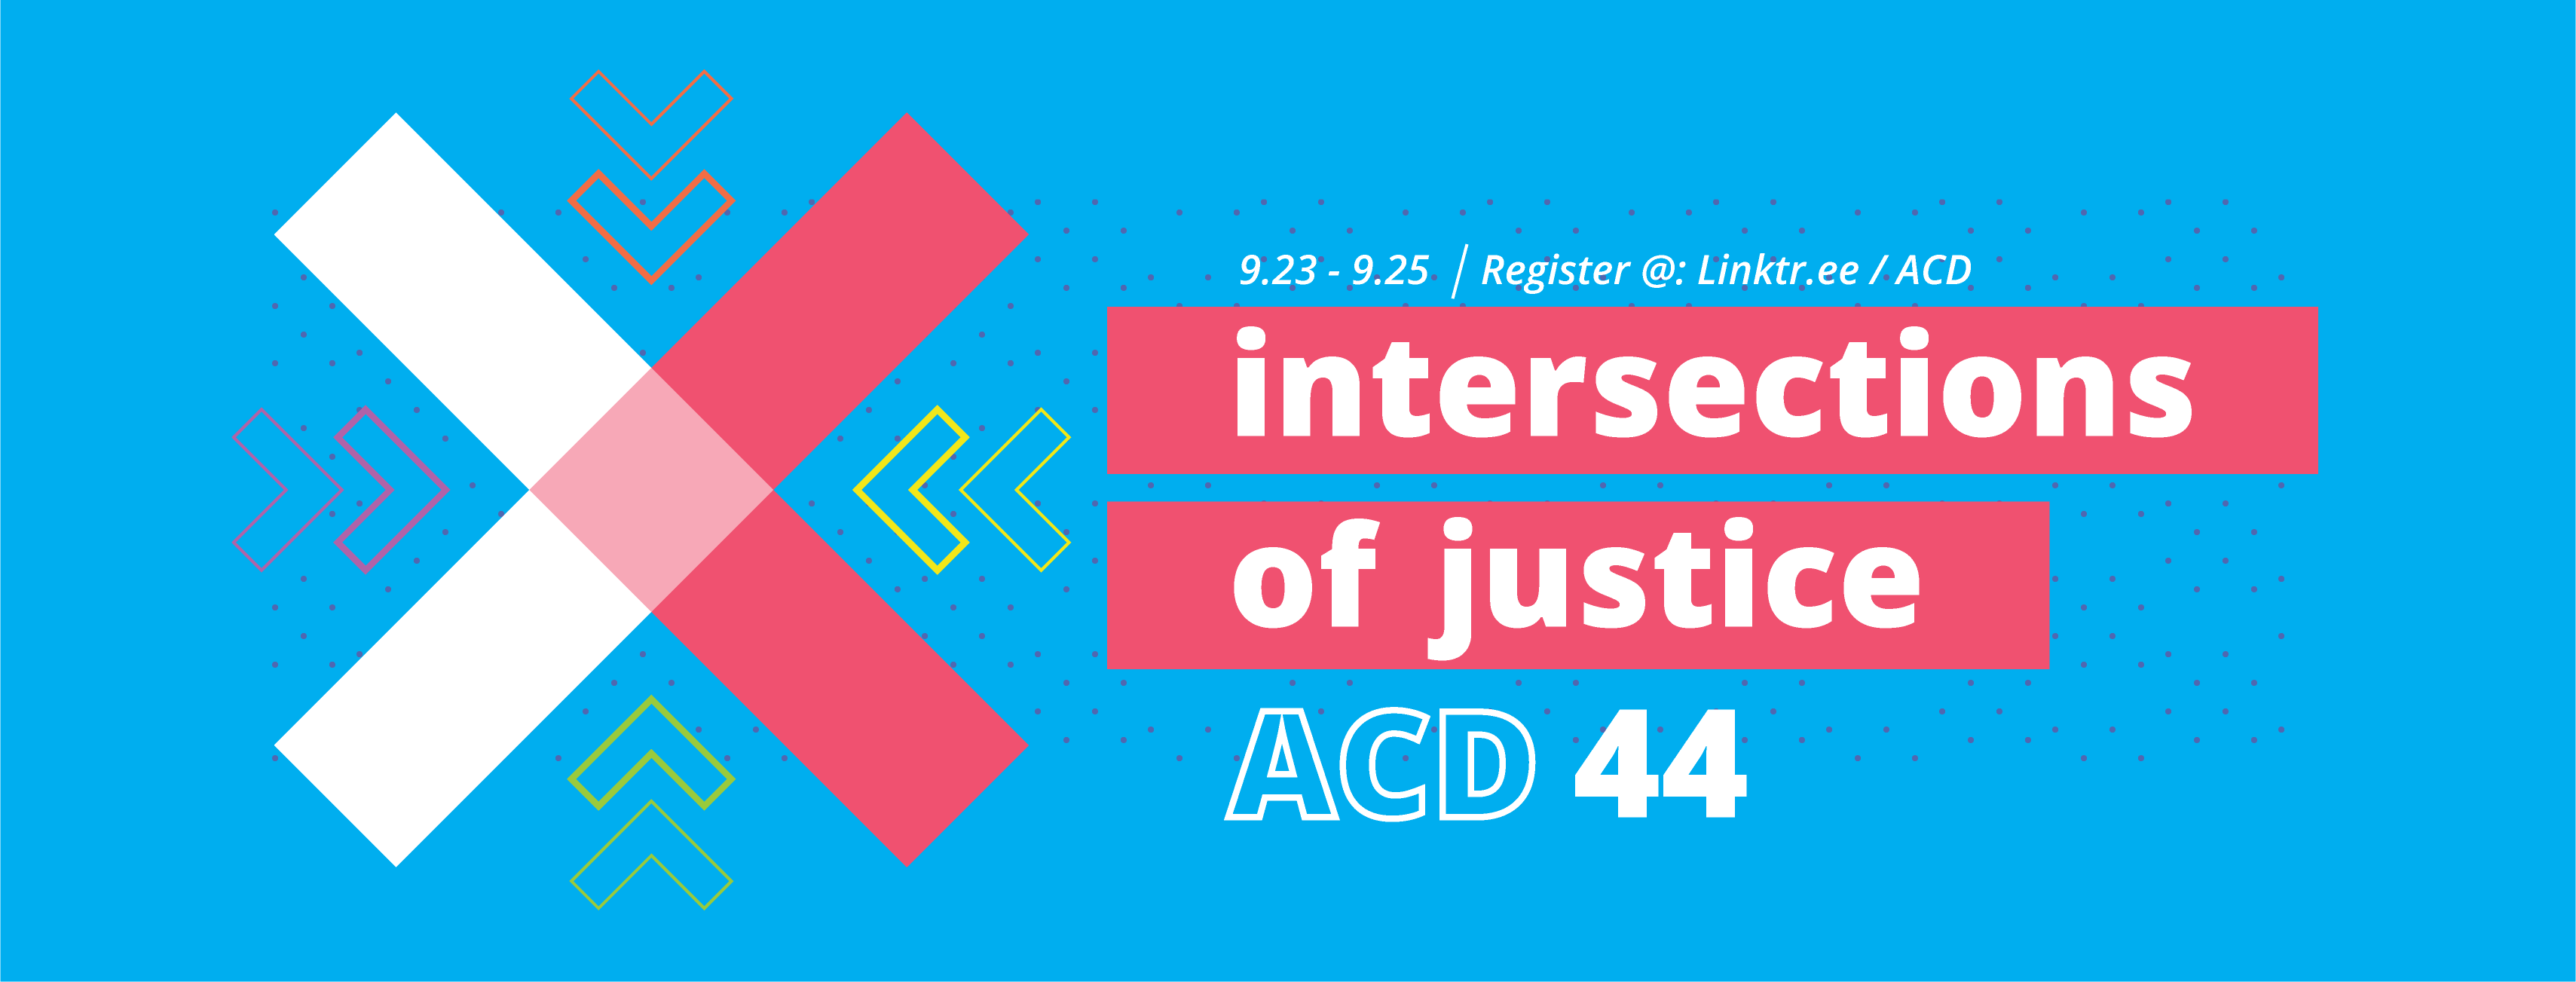 ACD44 2021: intersections of Justice Sept. 23-25